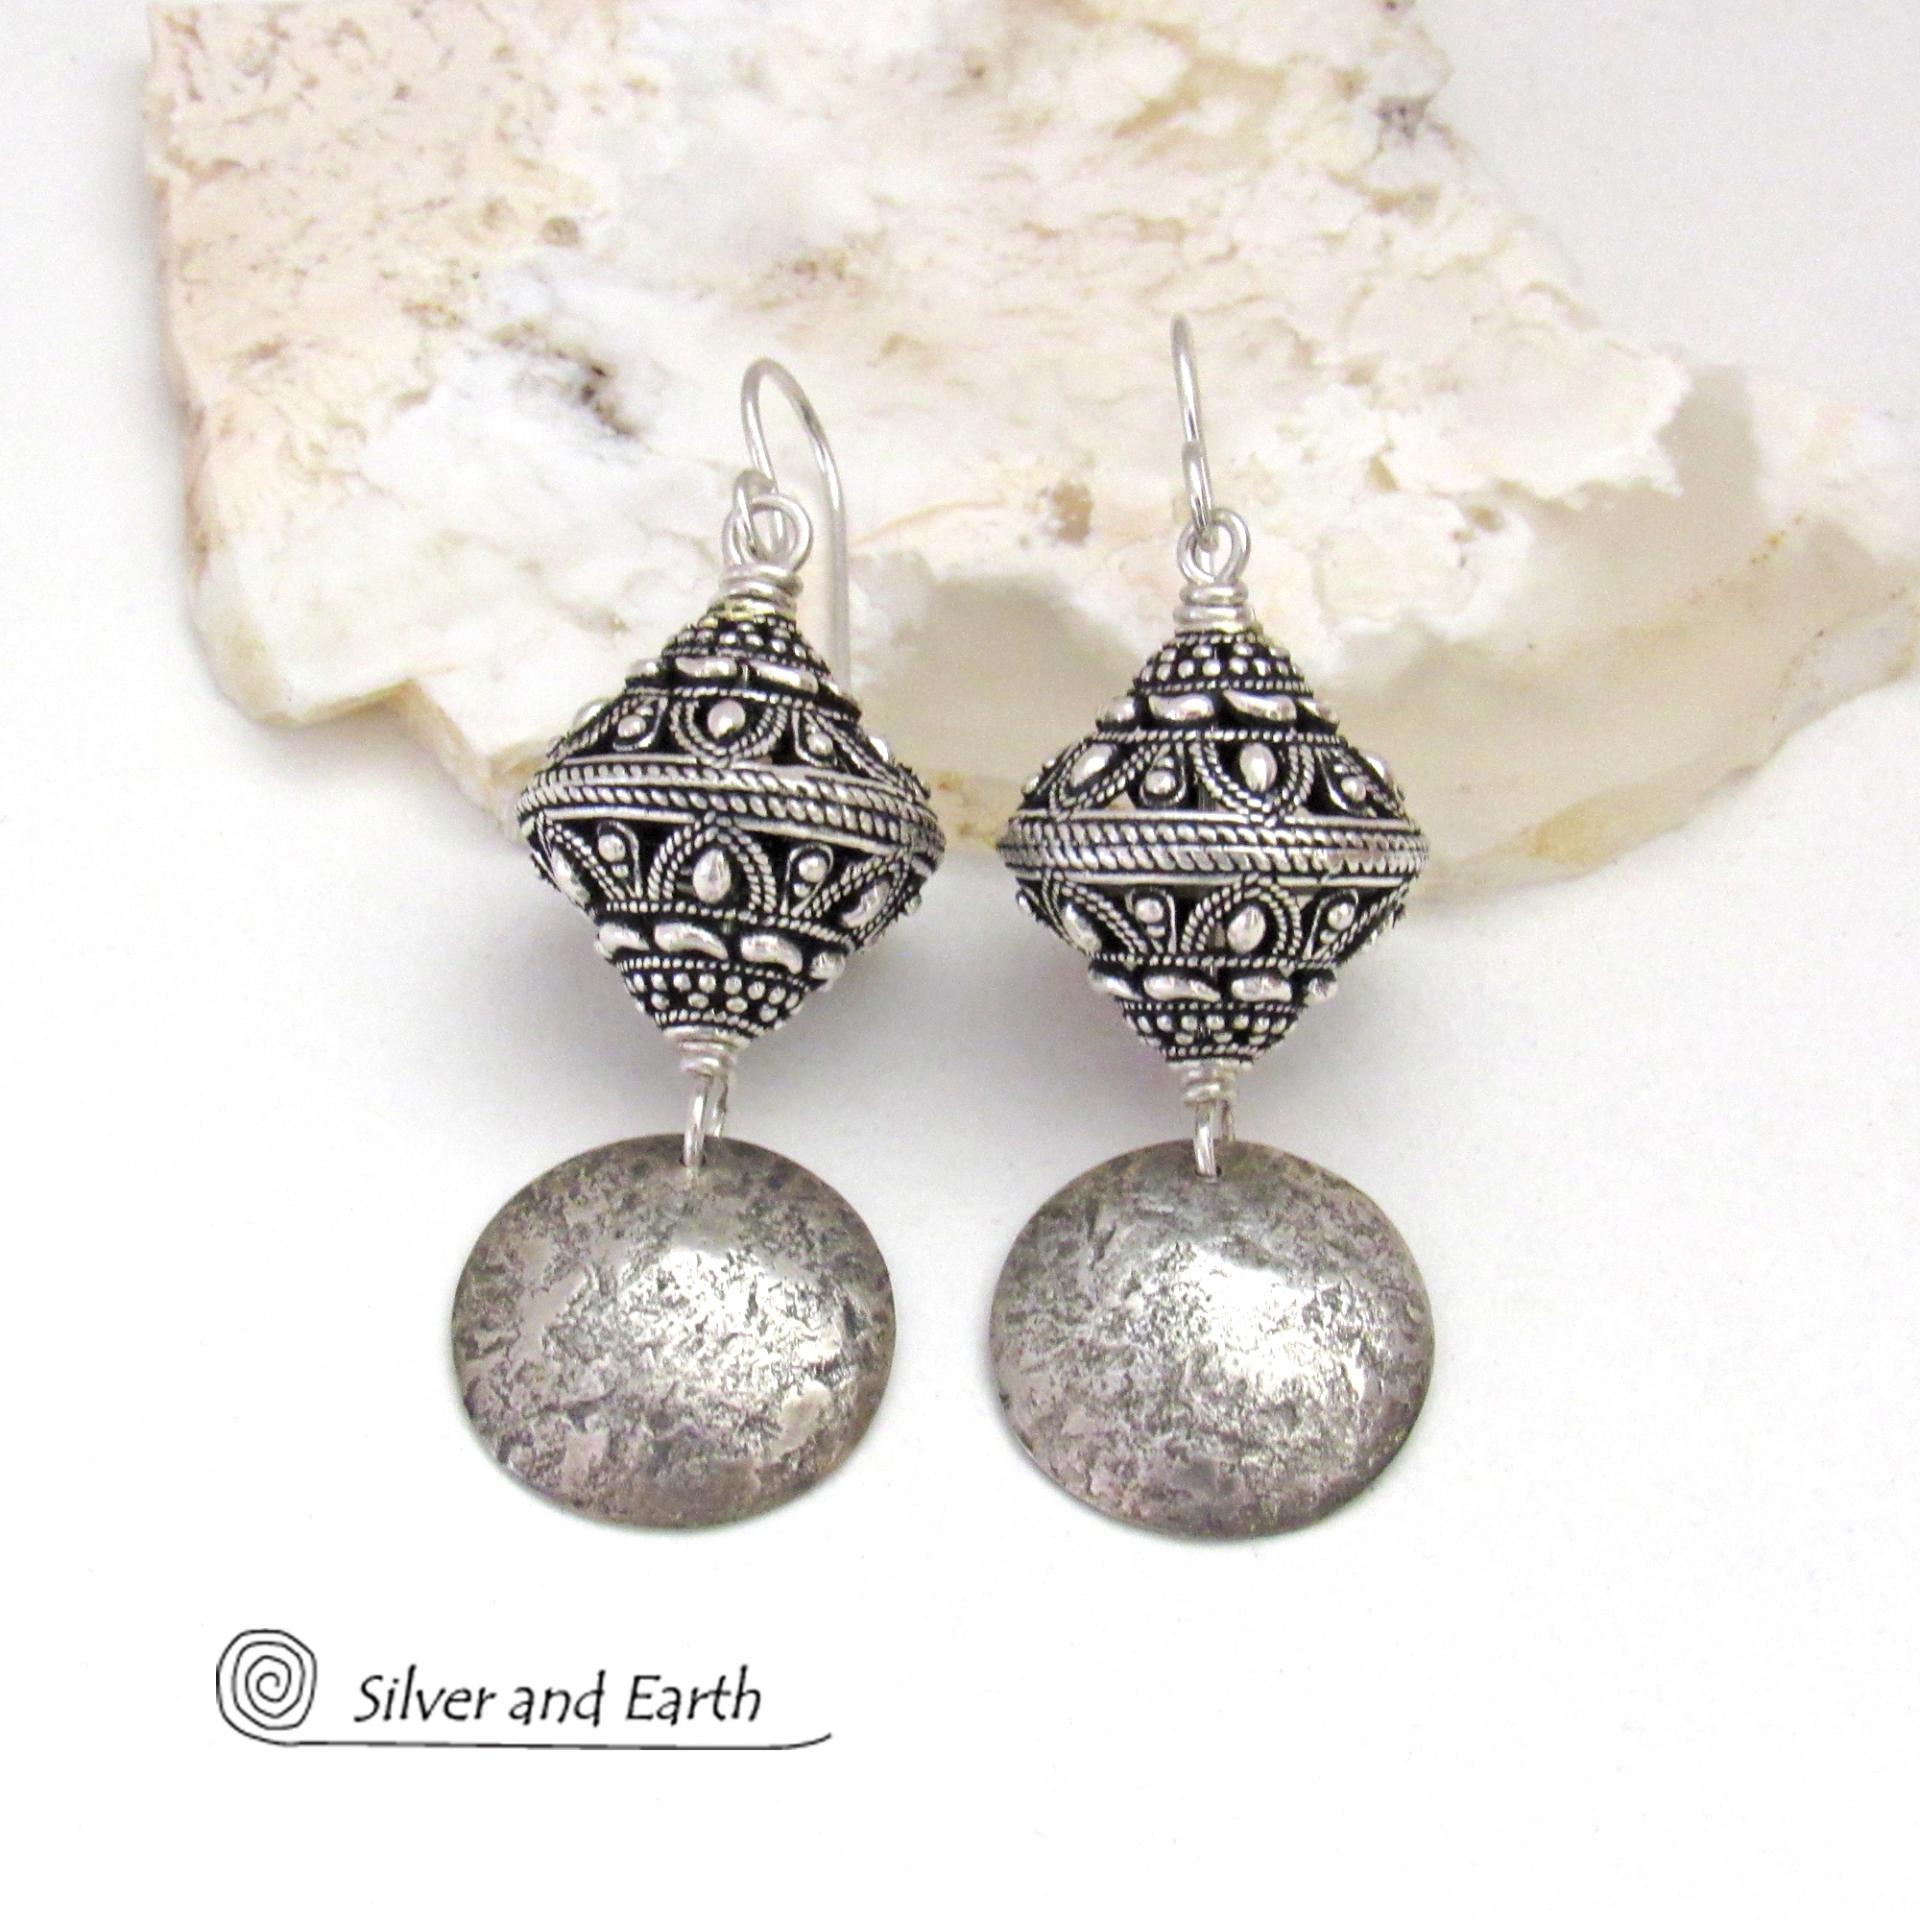 Textured Sterling Silver Dangle Earrings with Big Ornate Bali Style Beads - Elegant Modern Jewelry